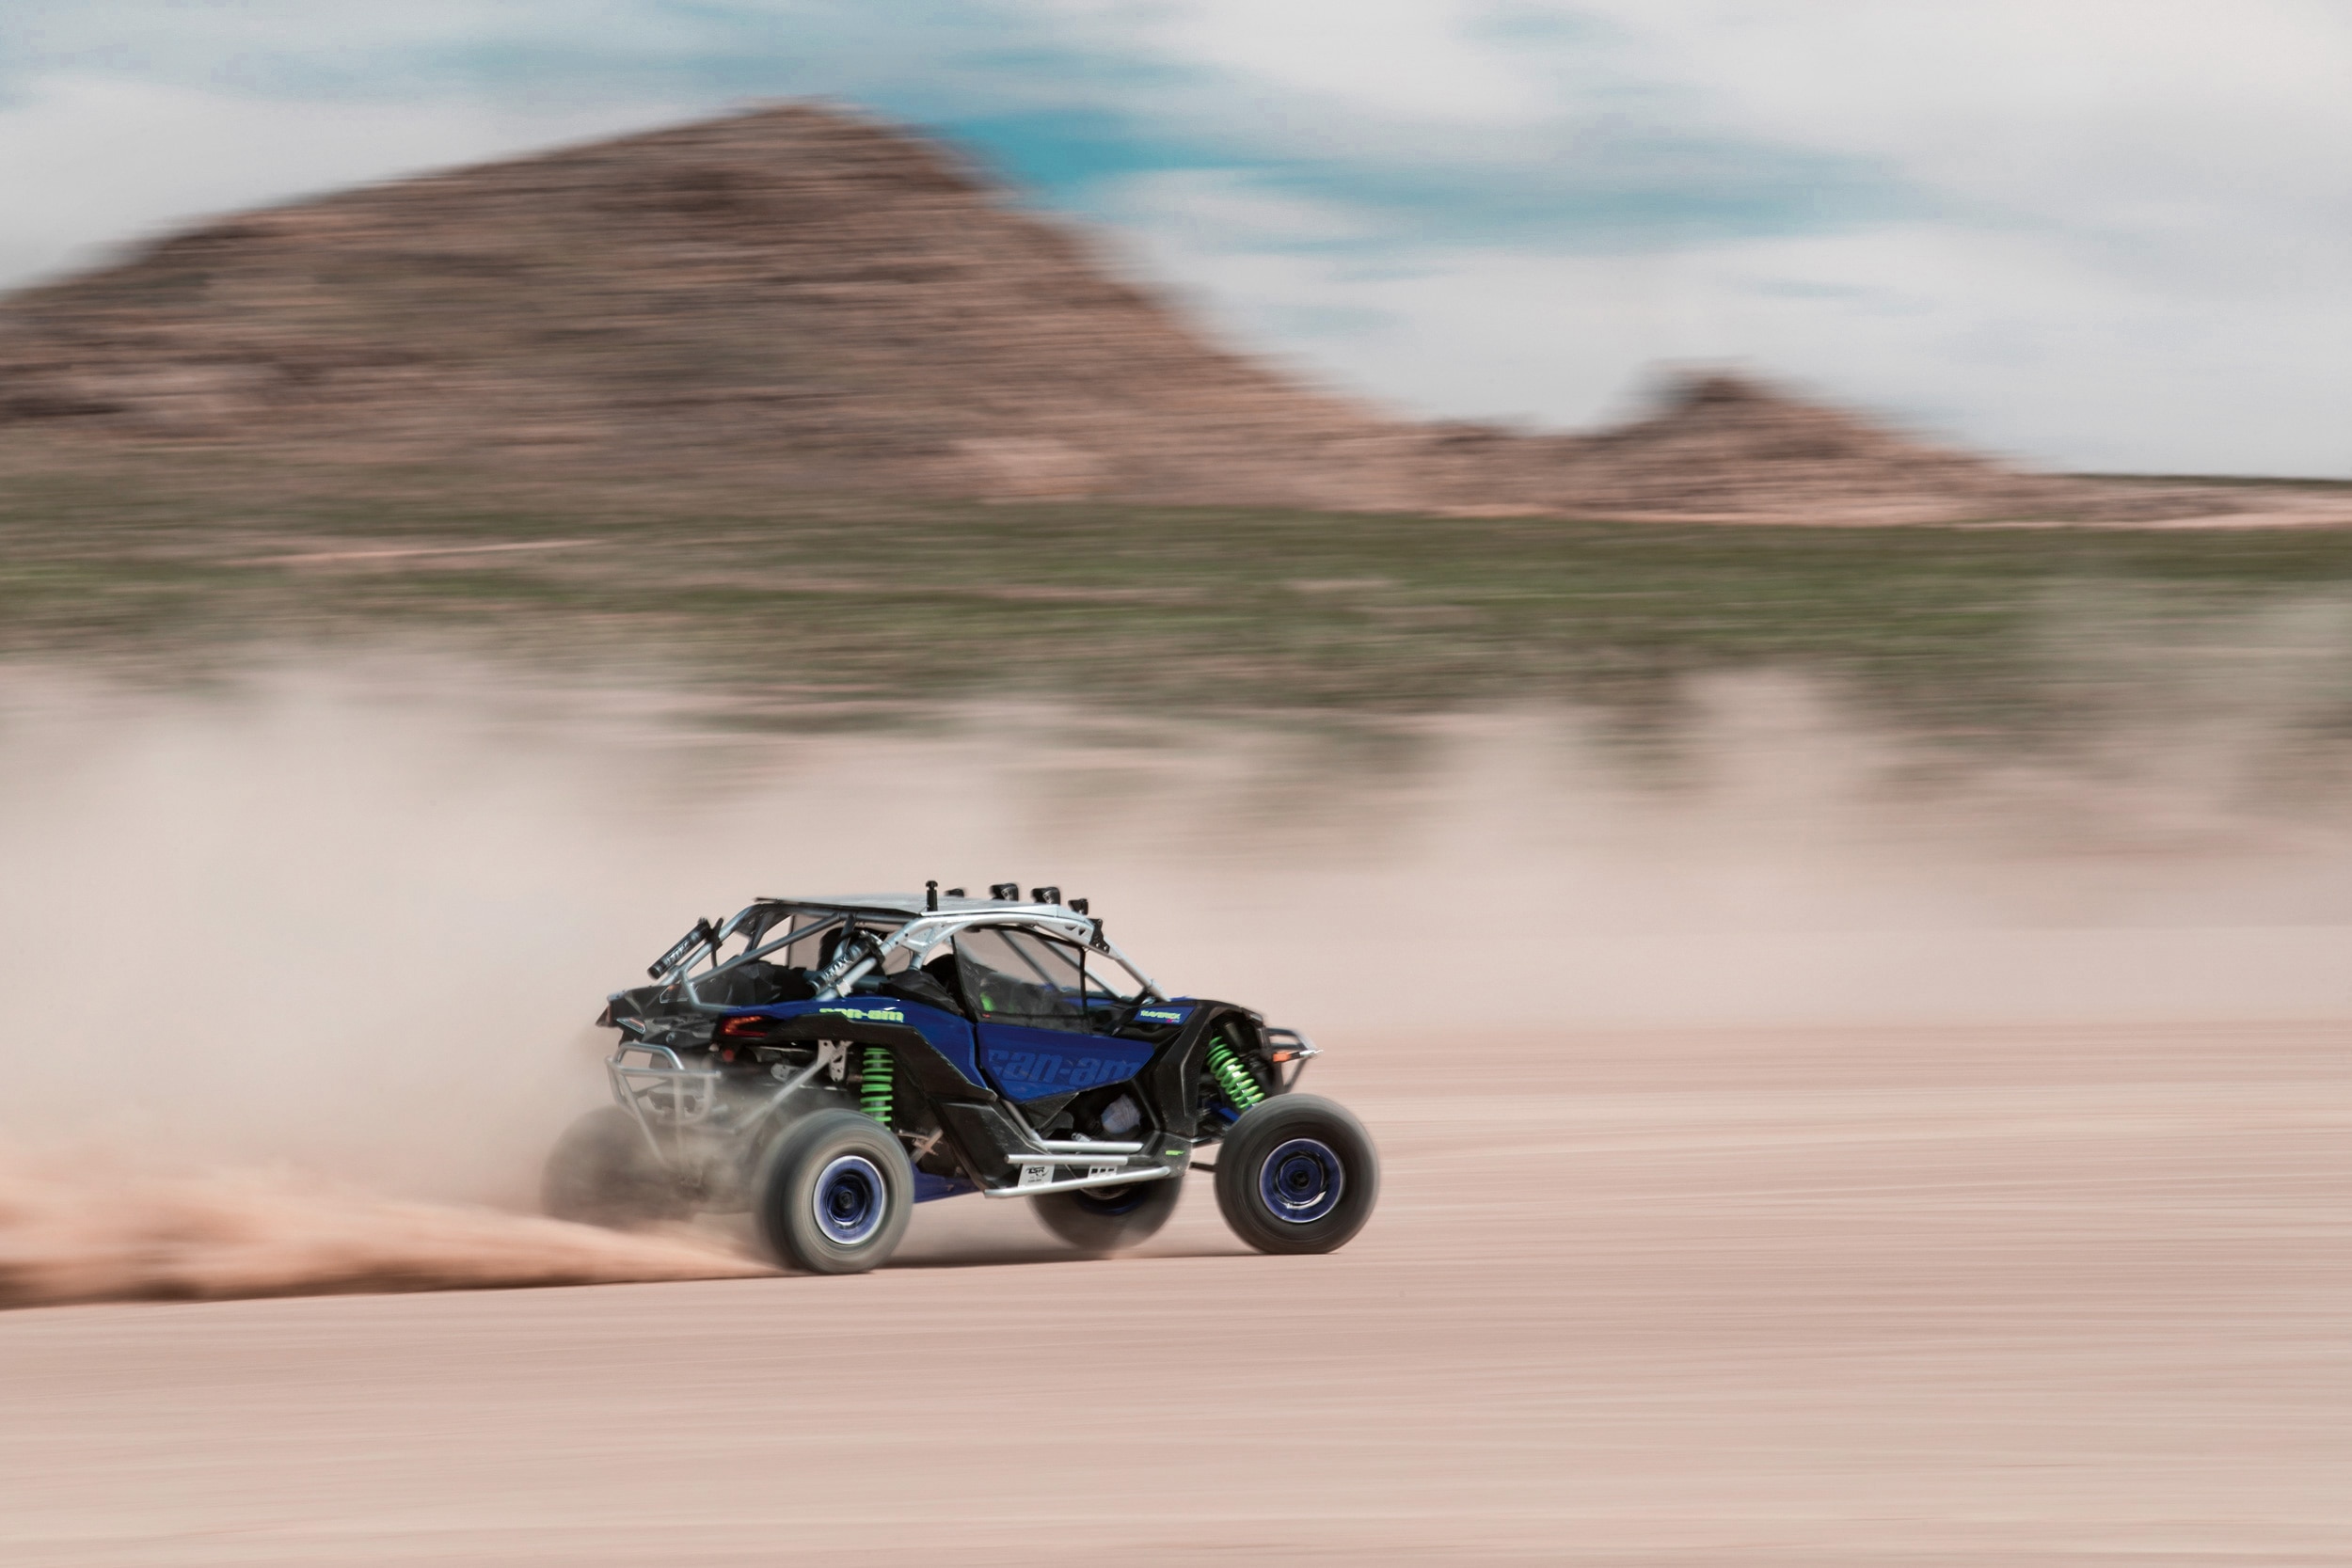 A Can-Am Maverick X3 X rs at full speed in the desert